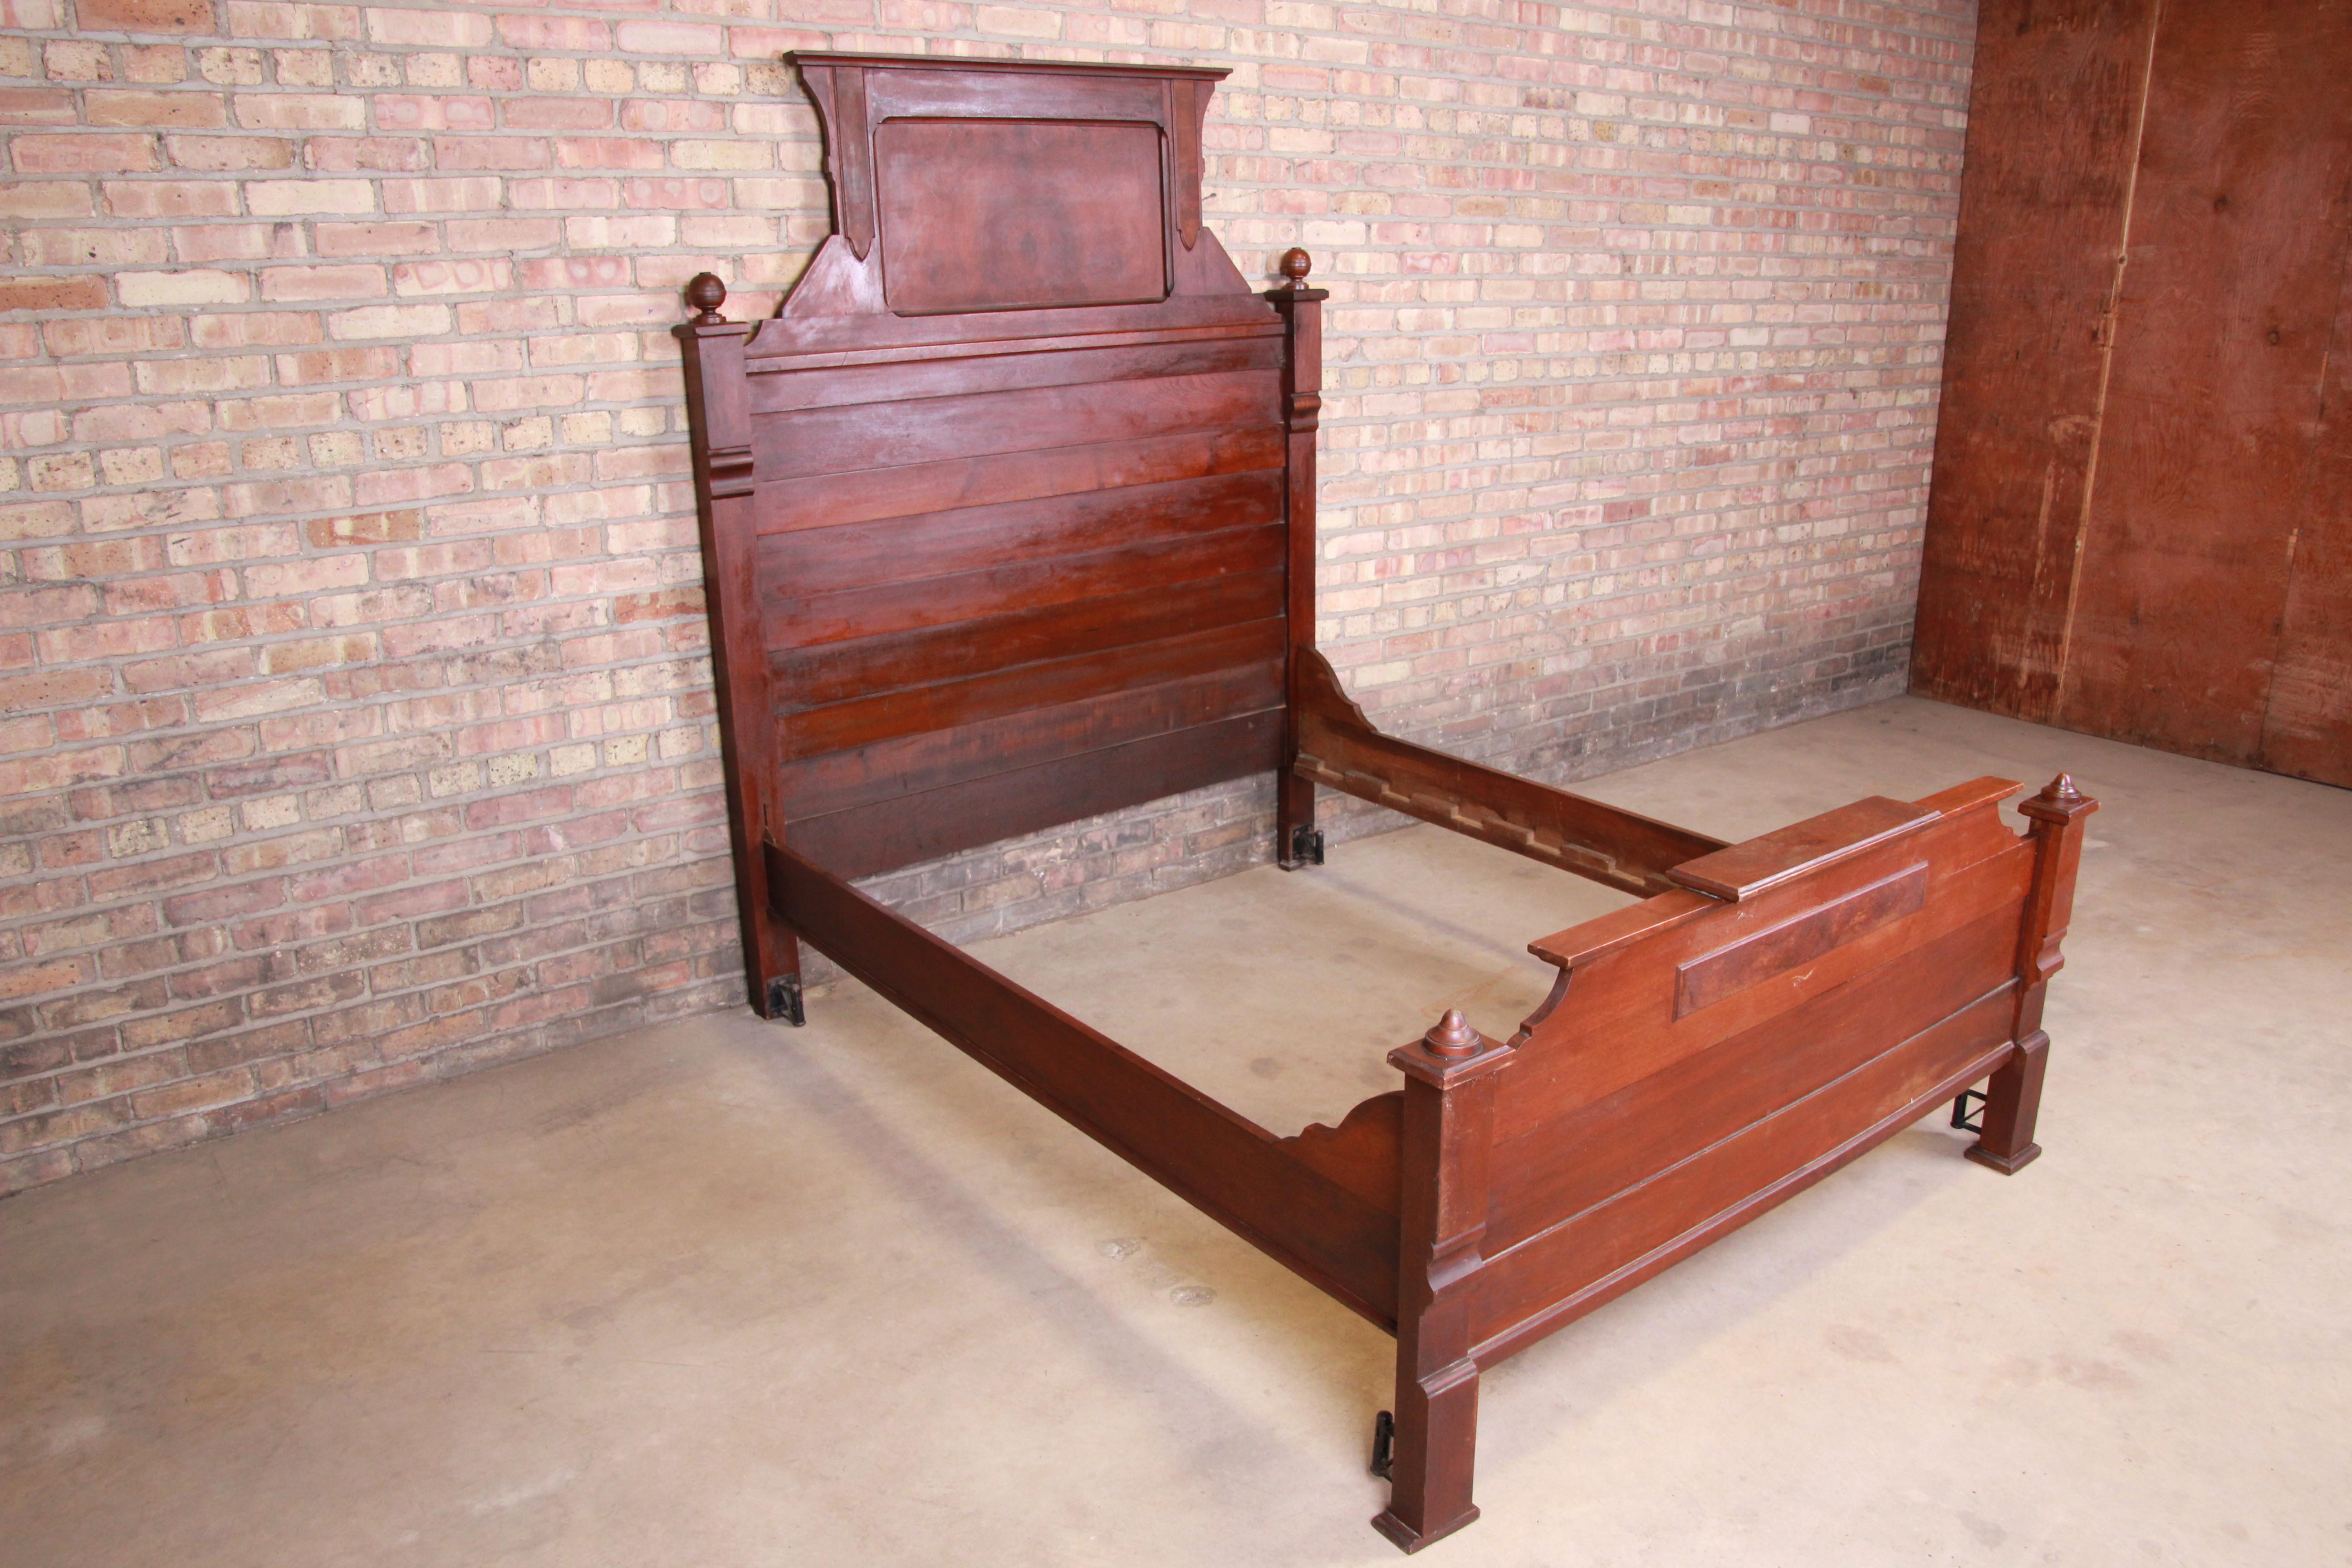 A gorgeous antique Eastlake Victorian full size bed frame

USA, circa 1860s

Solid walnut, with burled walnut panels.

Measures: 61.13